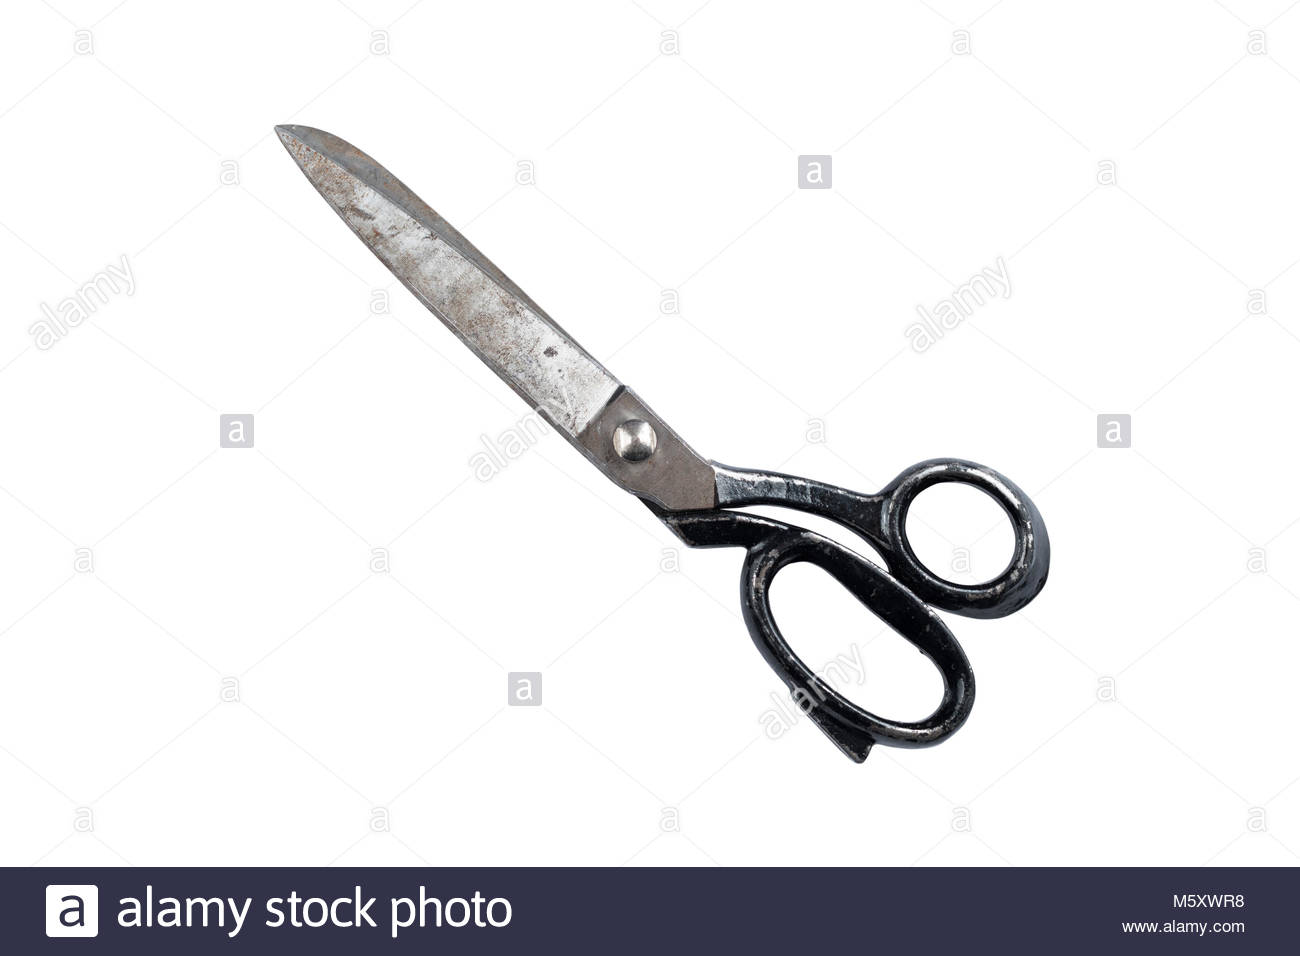 Old Metal Industrial Scissors Isolated On White Background Saved